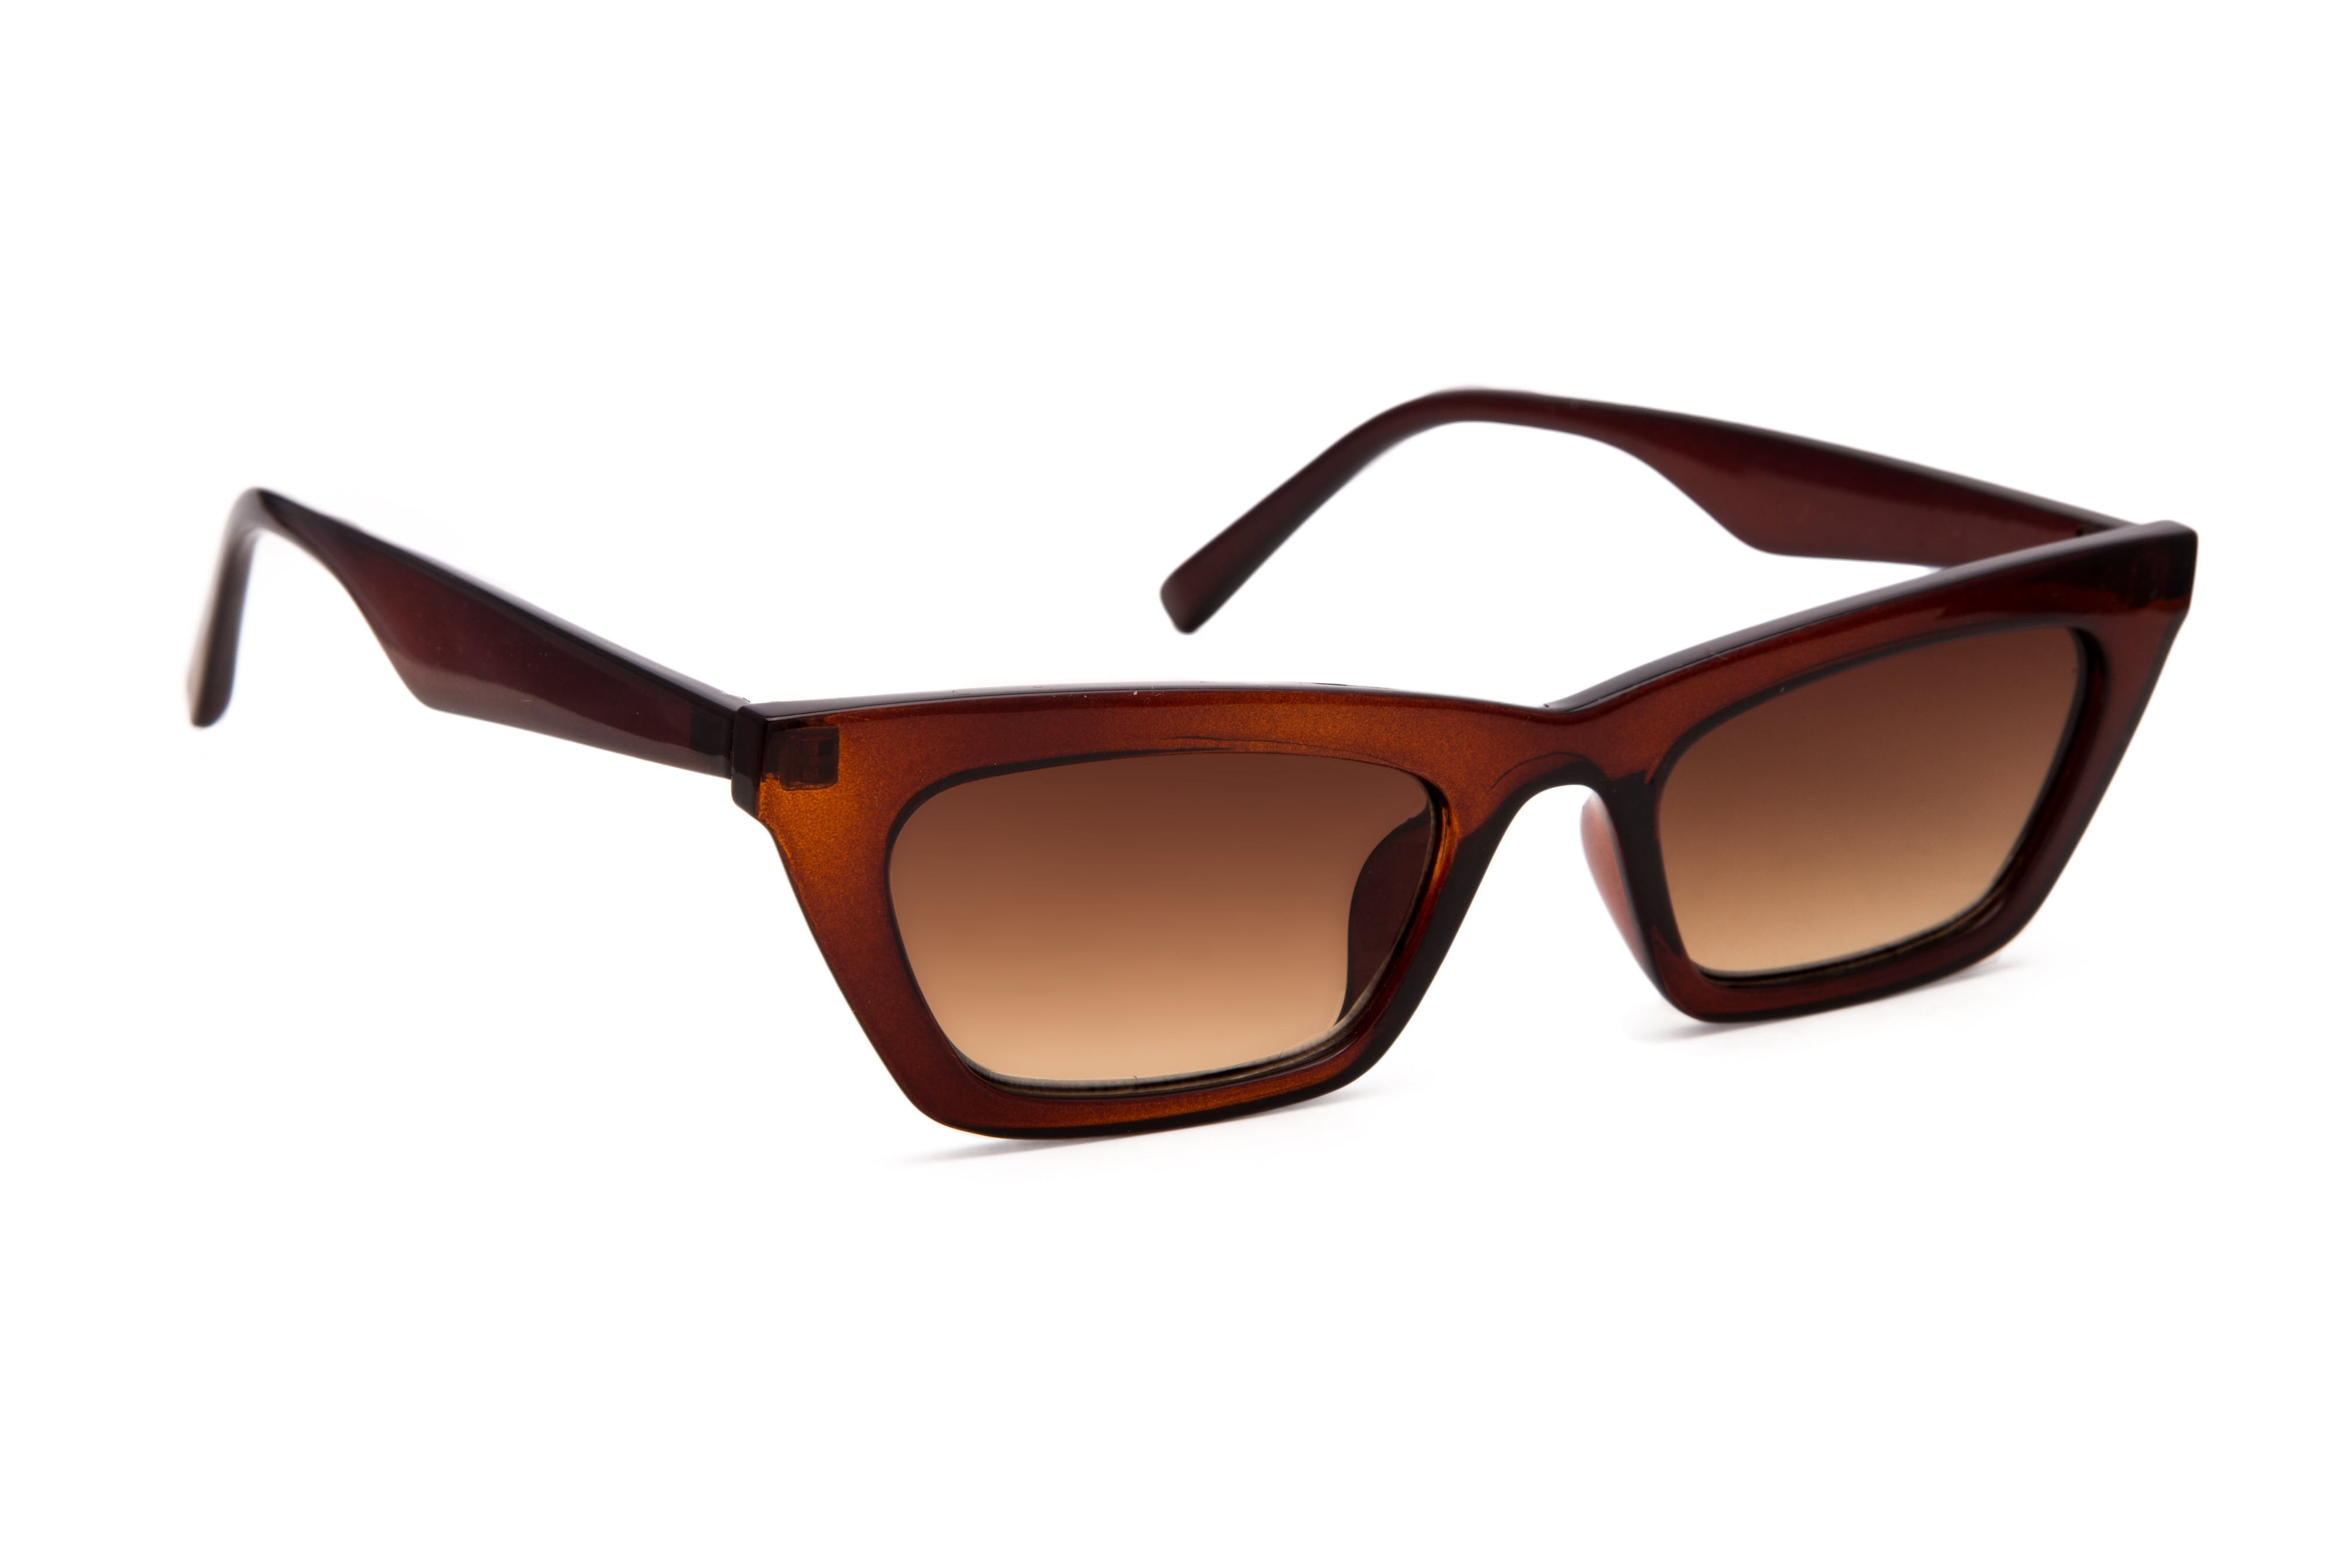 BROWN CAT EYE FRAMES SUNGLASSES WITH BROWN LENSES